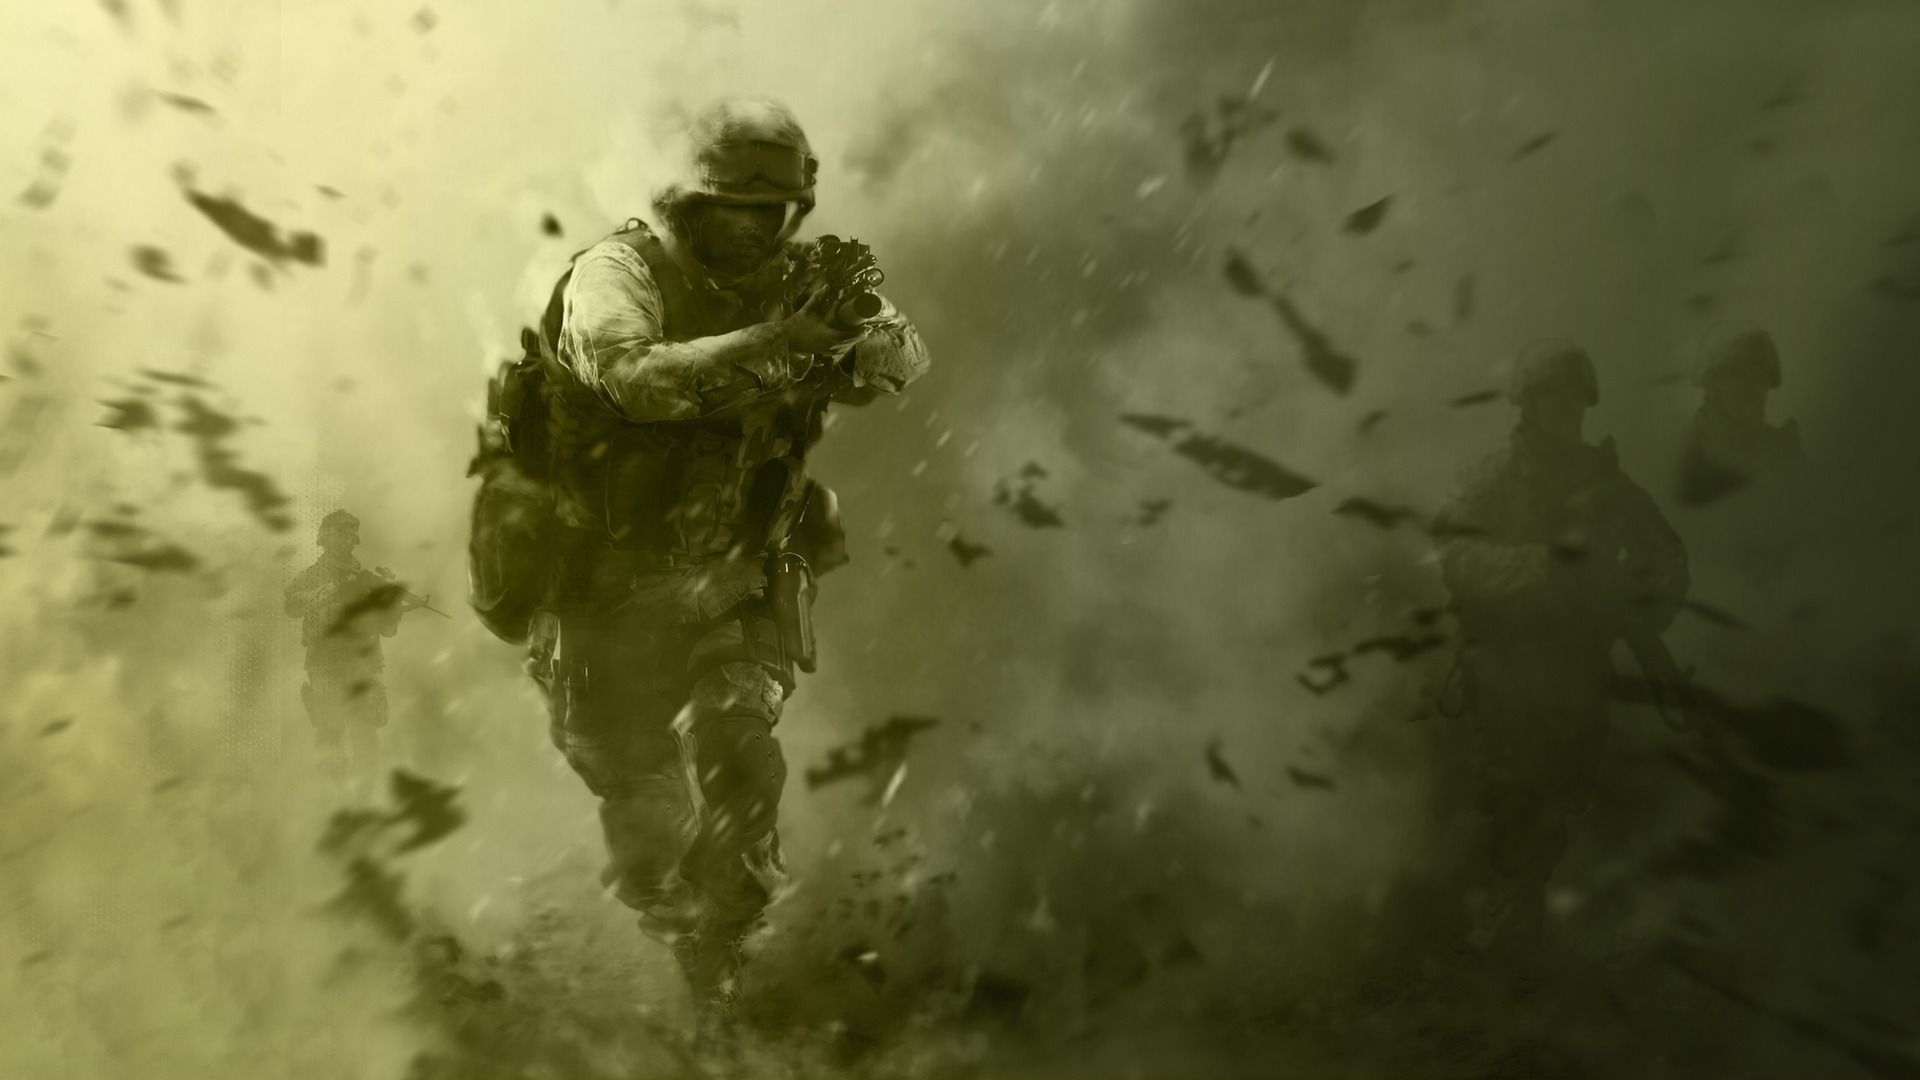 Call of Duty: Modern Warfare 2 Remastered Key Art Leaks, Campaign Only